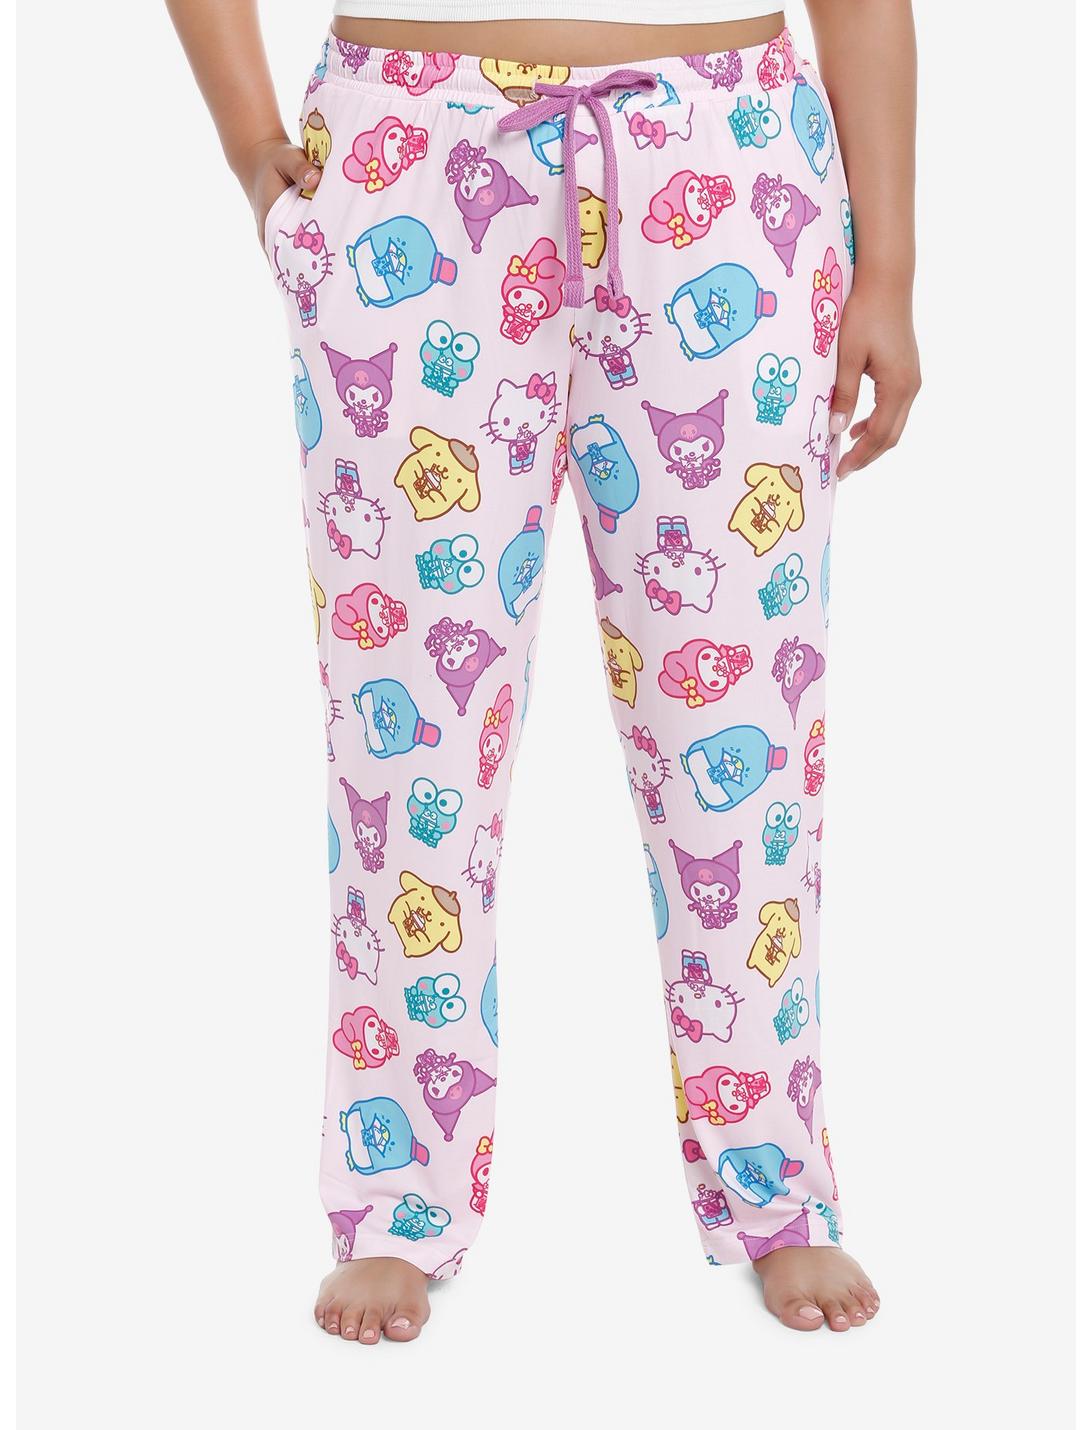 Hello Kitty And Friends Boba Girls Pajama Pants Plus Size, MULTI, hi-res